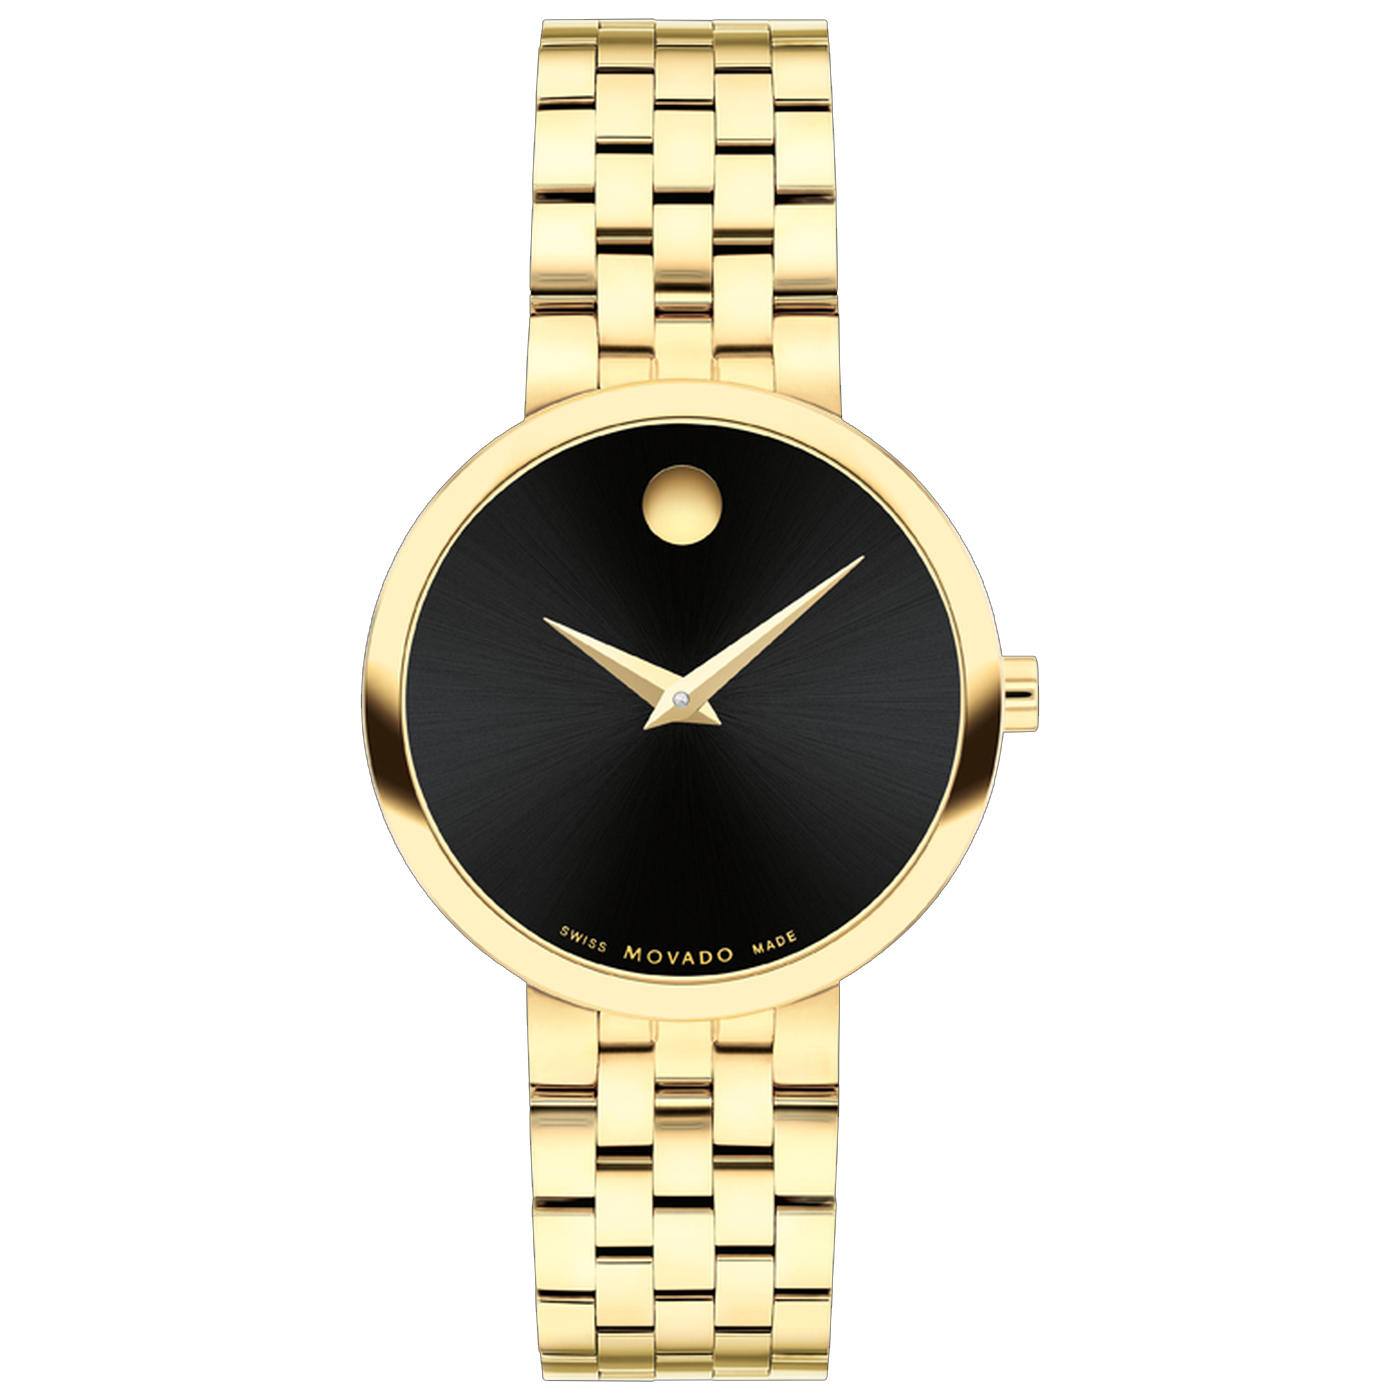 Museum Classic Black Dial Gold-Tone Stainless Steel Watch 29.5mm - 0 - Movado 607847